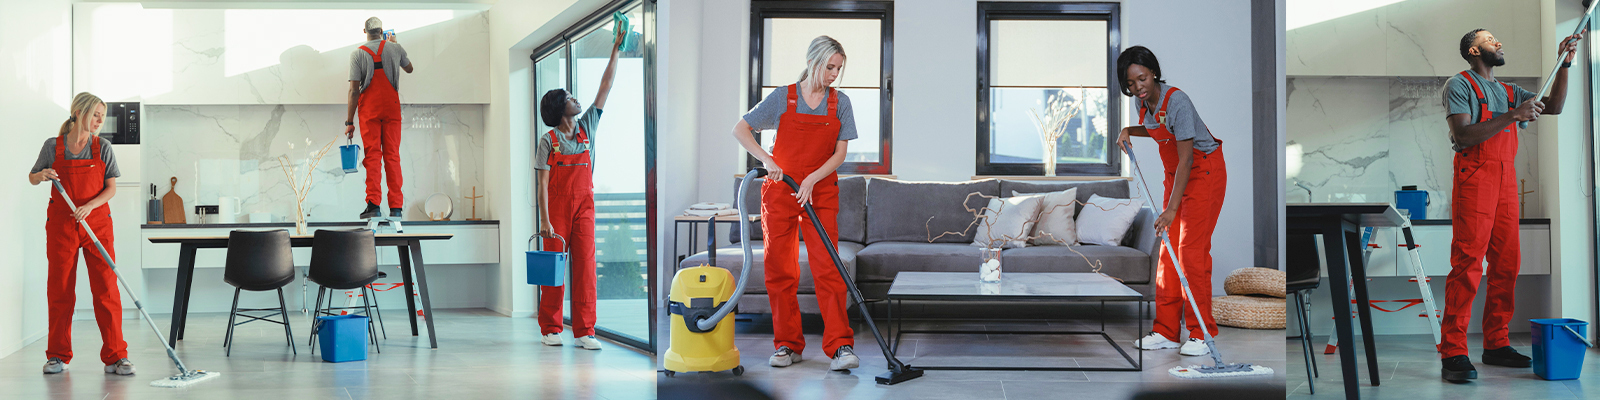 Cleaners and Disinfectants | Health Care Without Harm